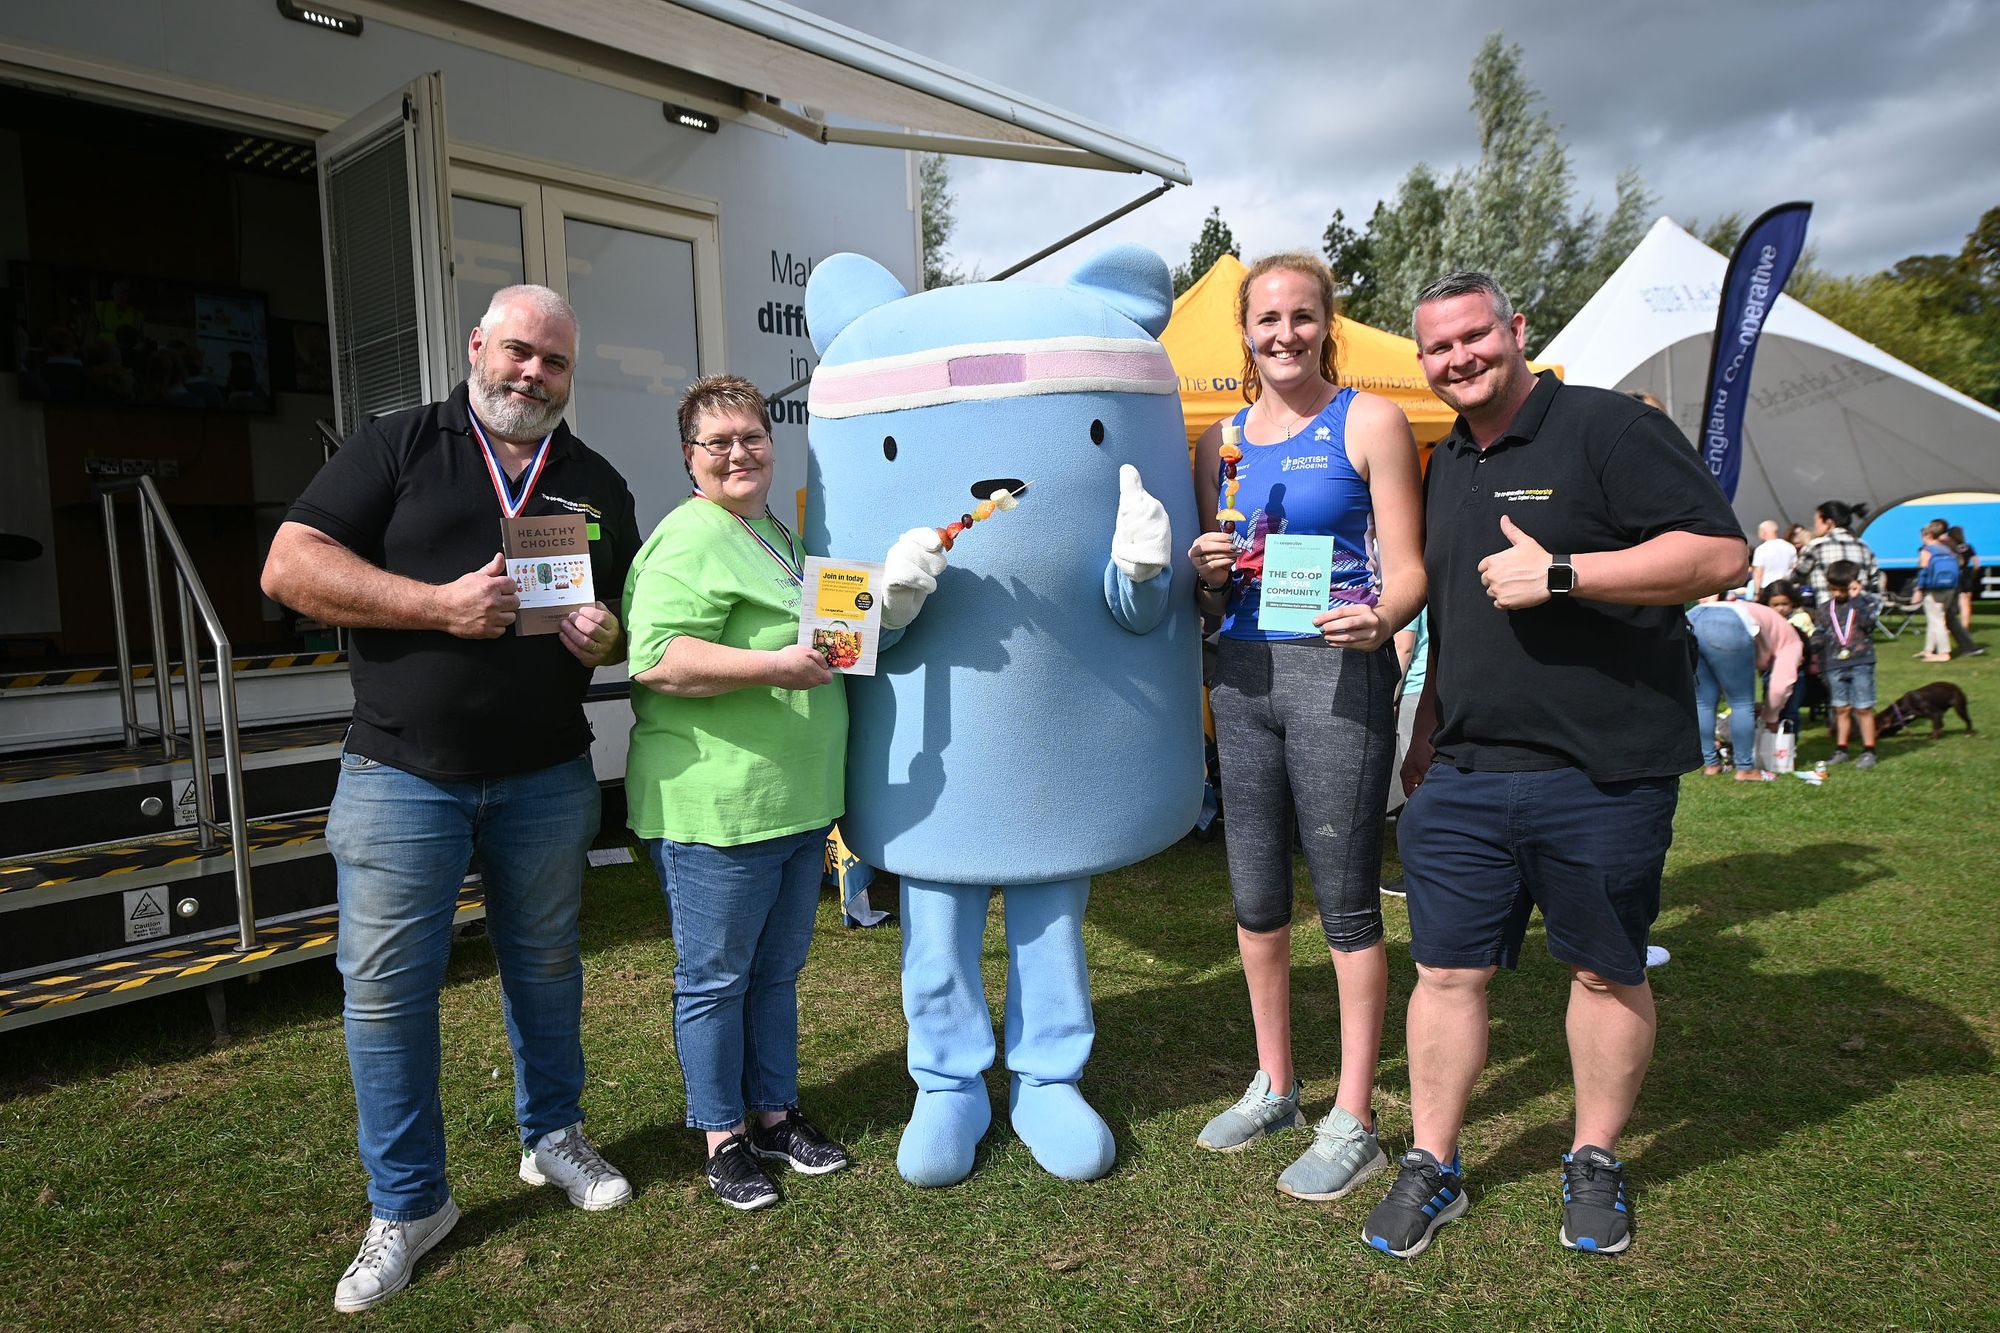 A weekend of Fun and Fruit at the Lichfield Community Games